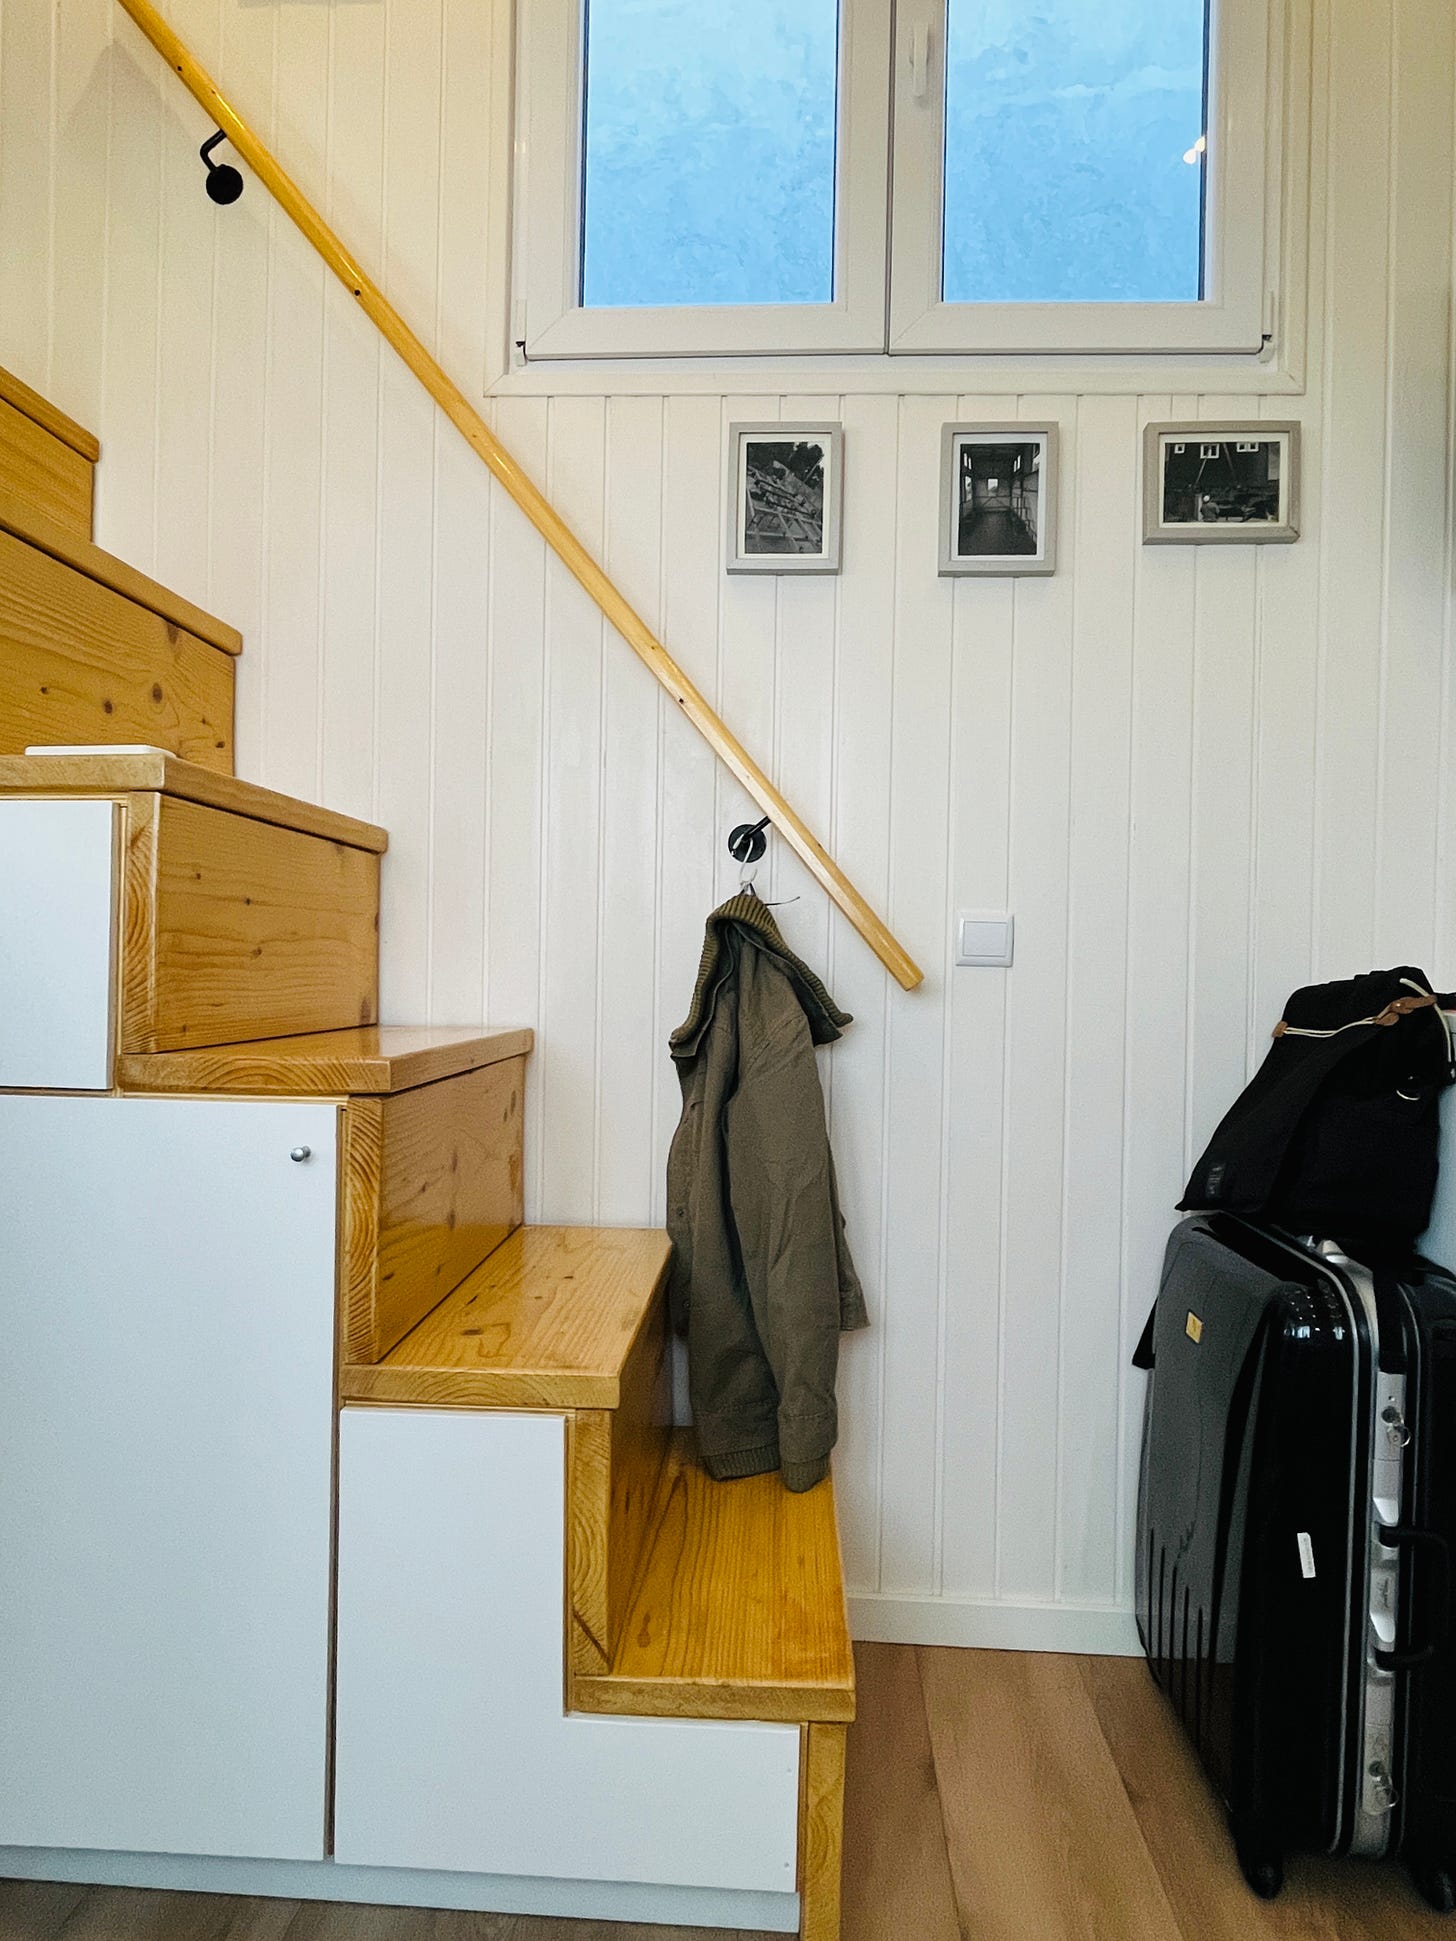 Image: photo of a wooden staircase, a jacket hanging from the staircase rail, two white windows on the top, and on the right, a black colour suitcase and a black colour backpack.